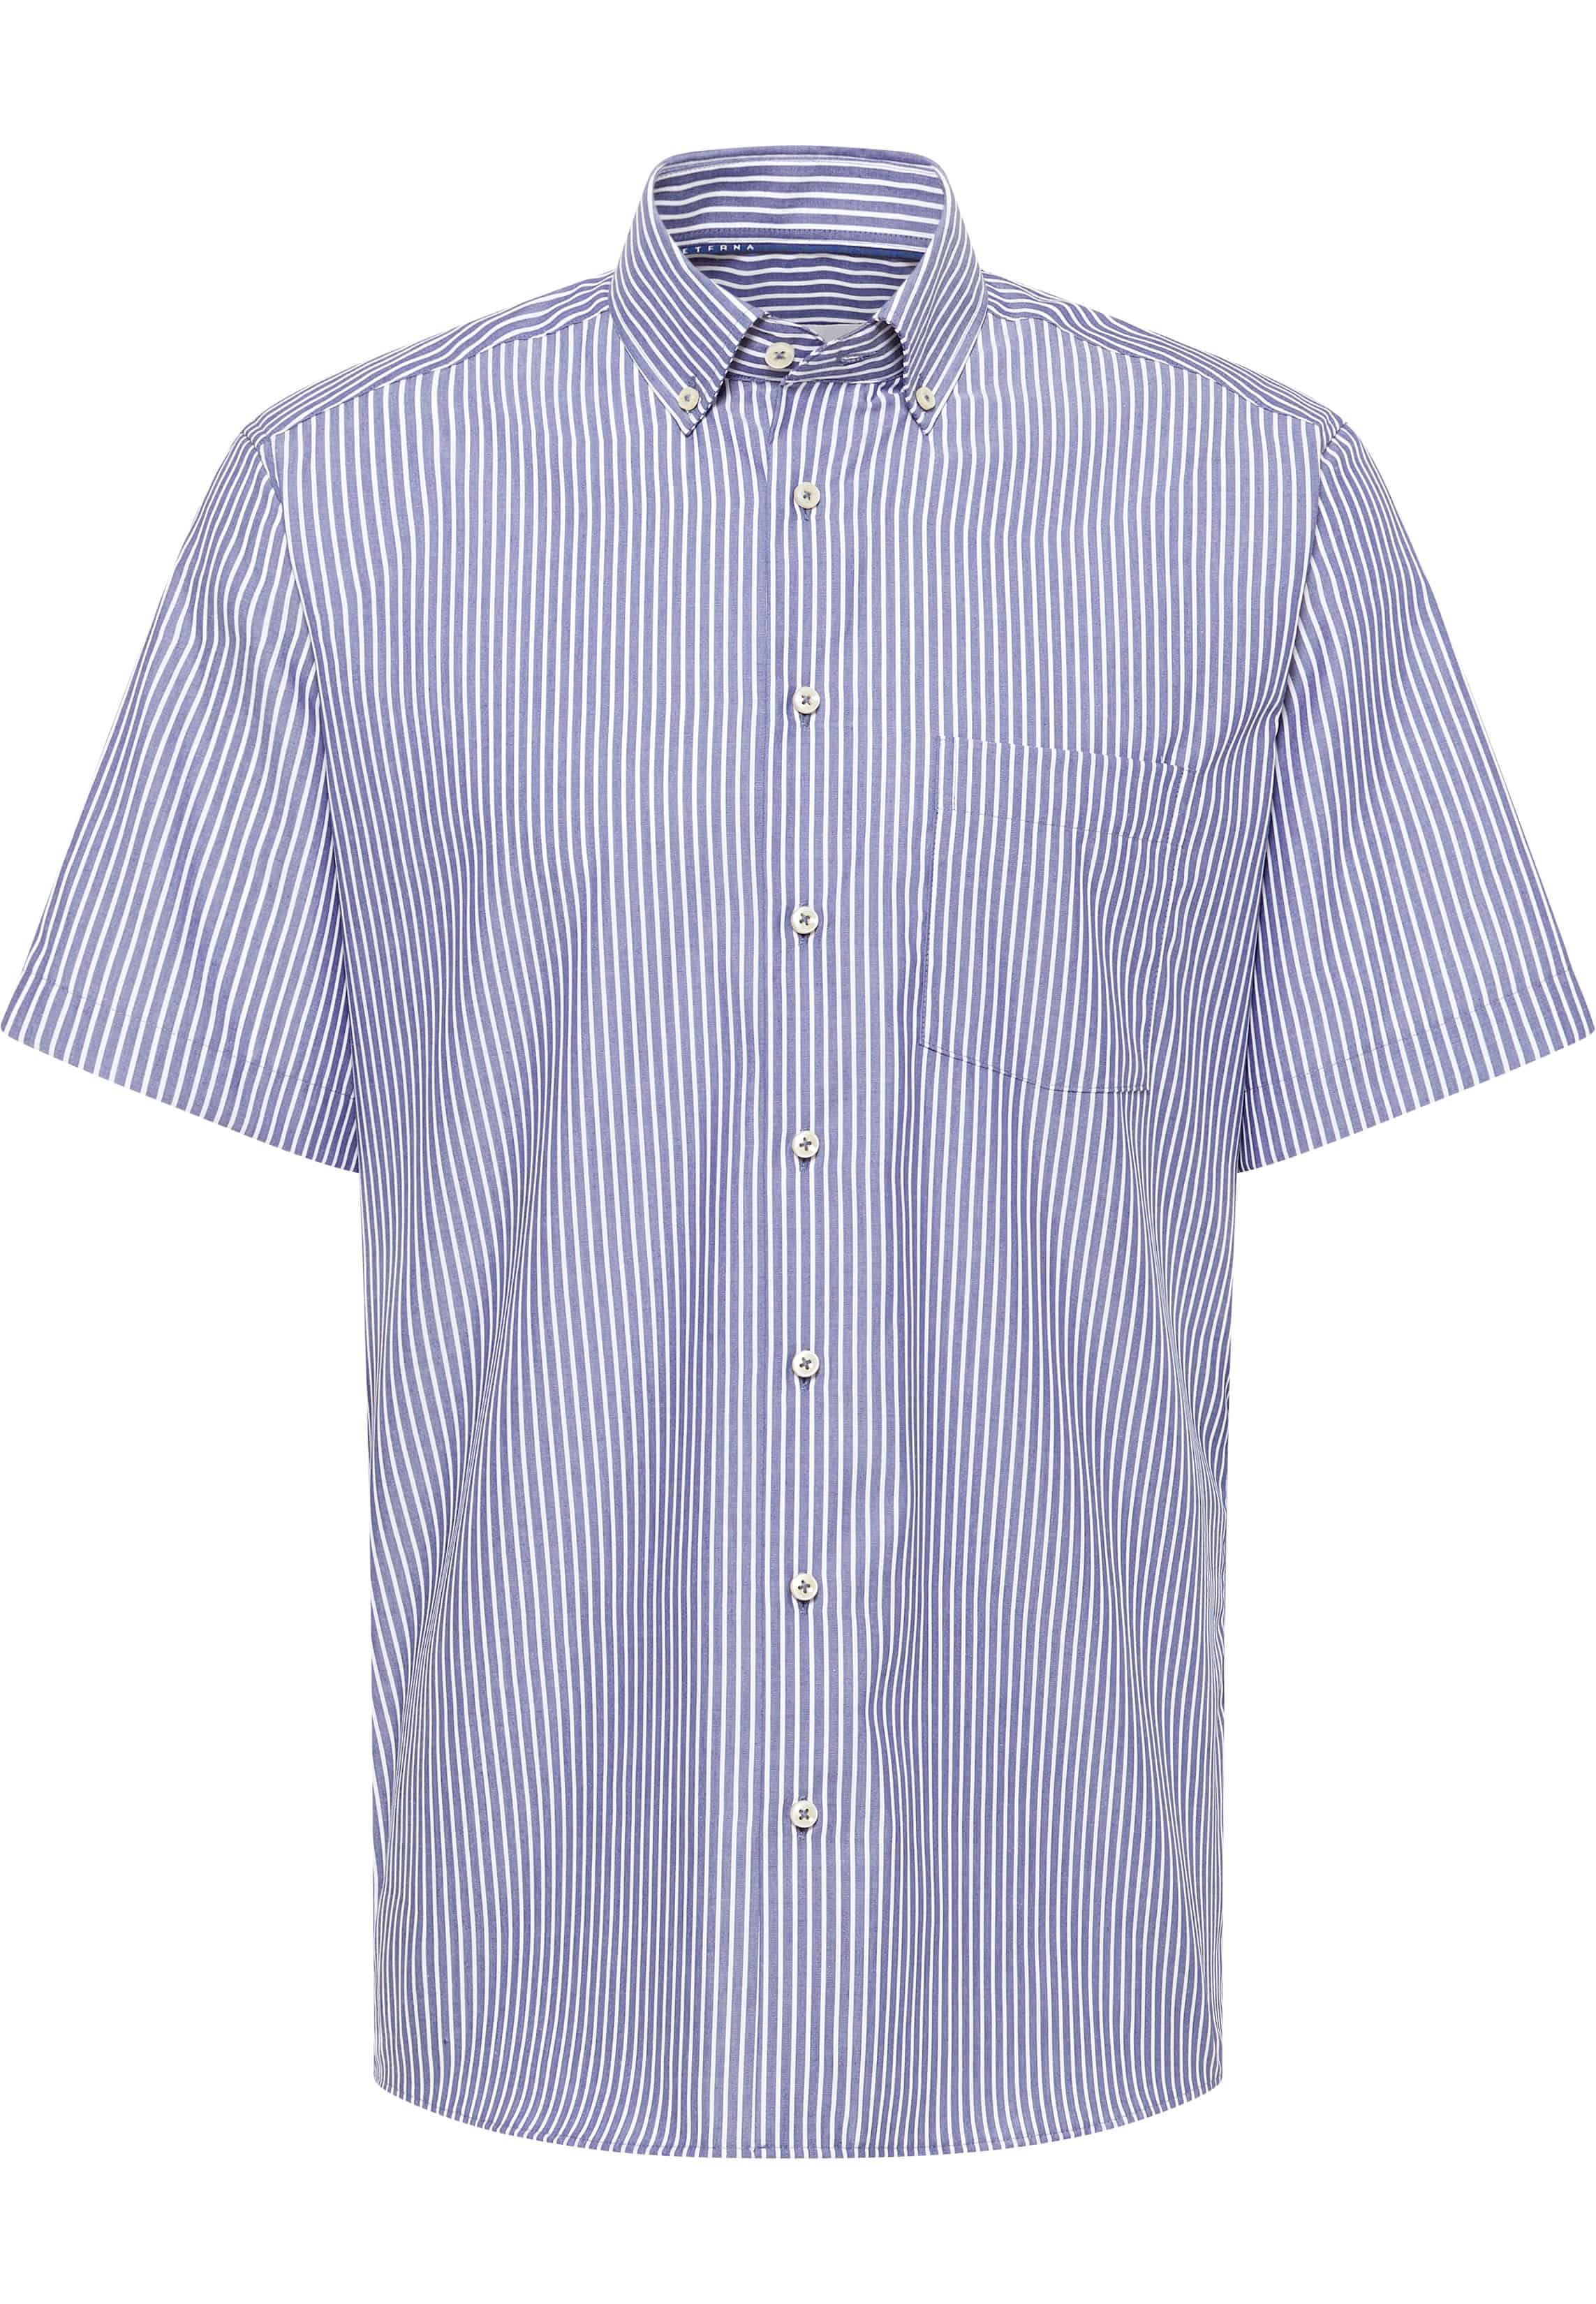 MODERN FIT Shirt in navy striped